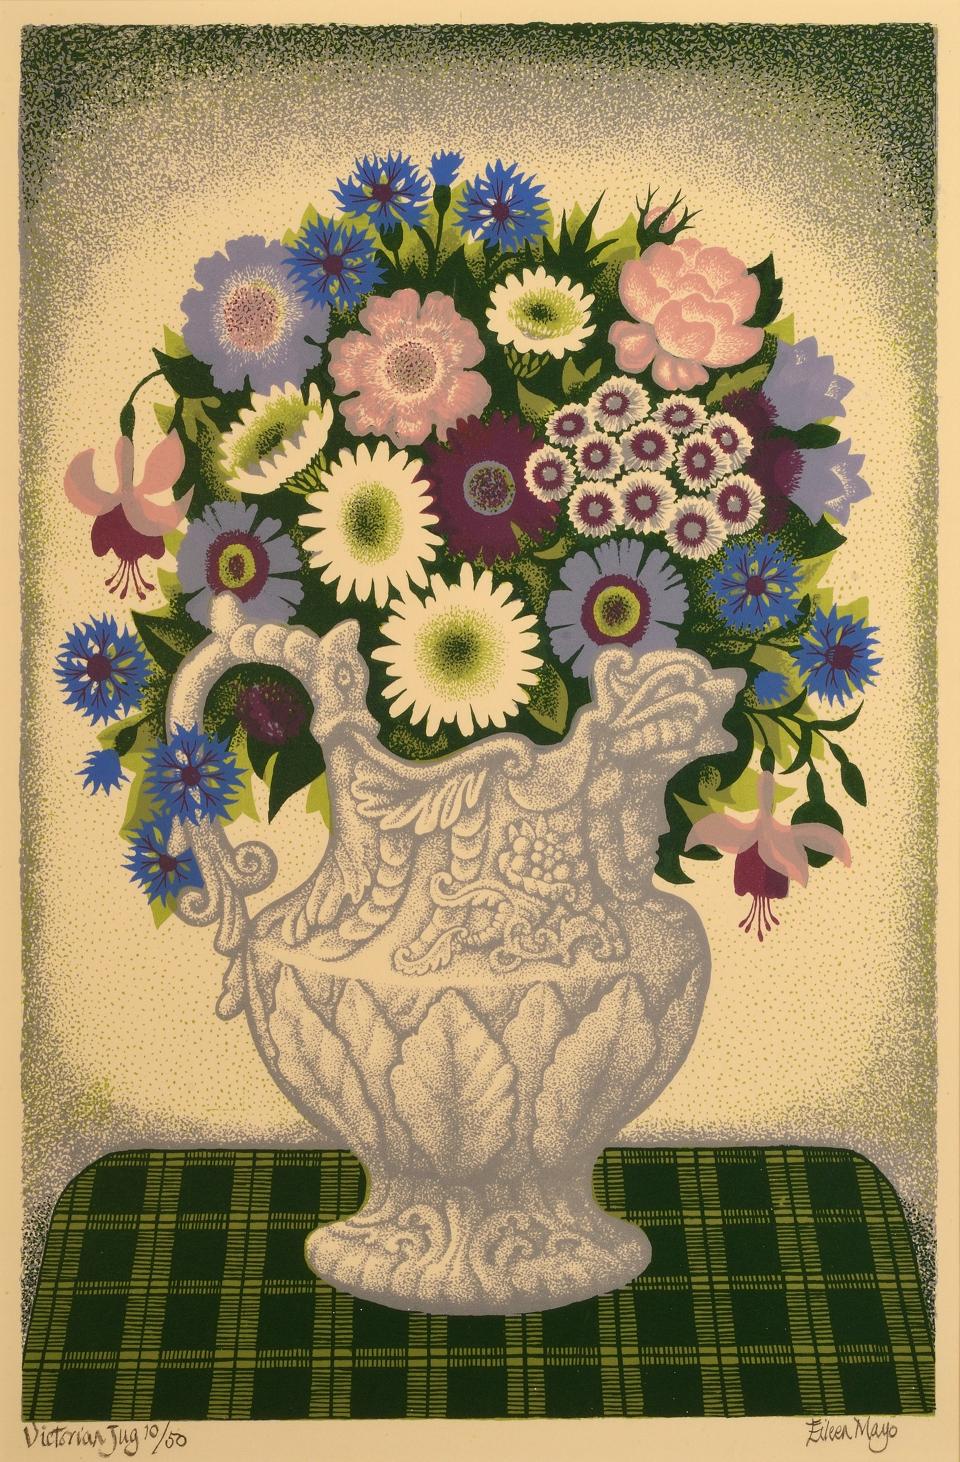 Eileen Mayo  Victorian Jug (1984) screenprint 10/50, 450 x 292mm Collection of Aratoi Wairarapa Museum of Art and History. Gift of an anonymous donor.